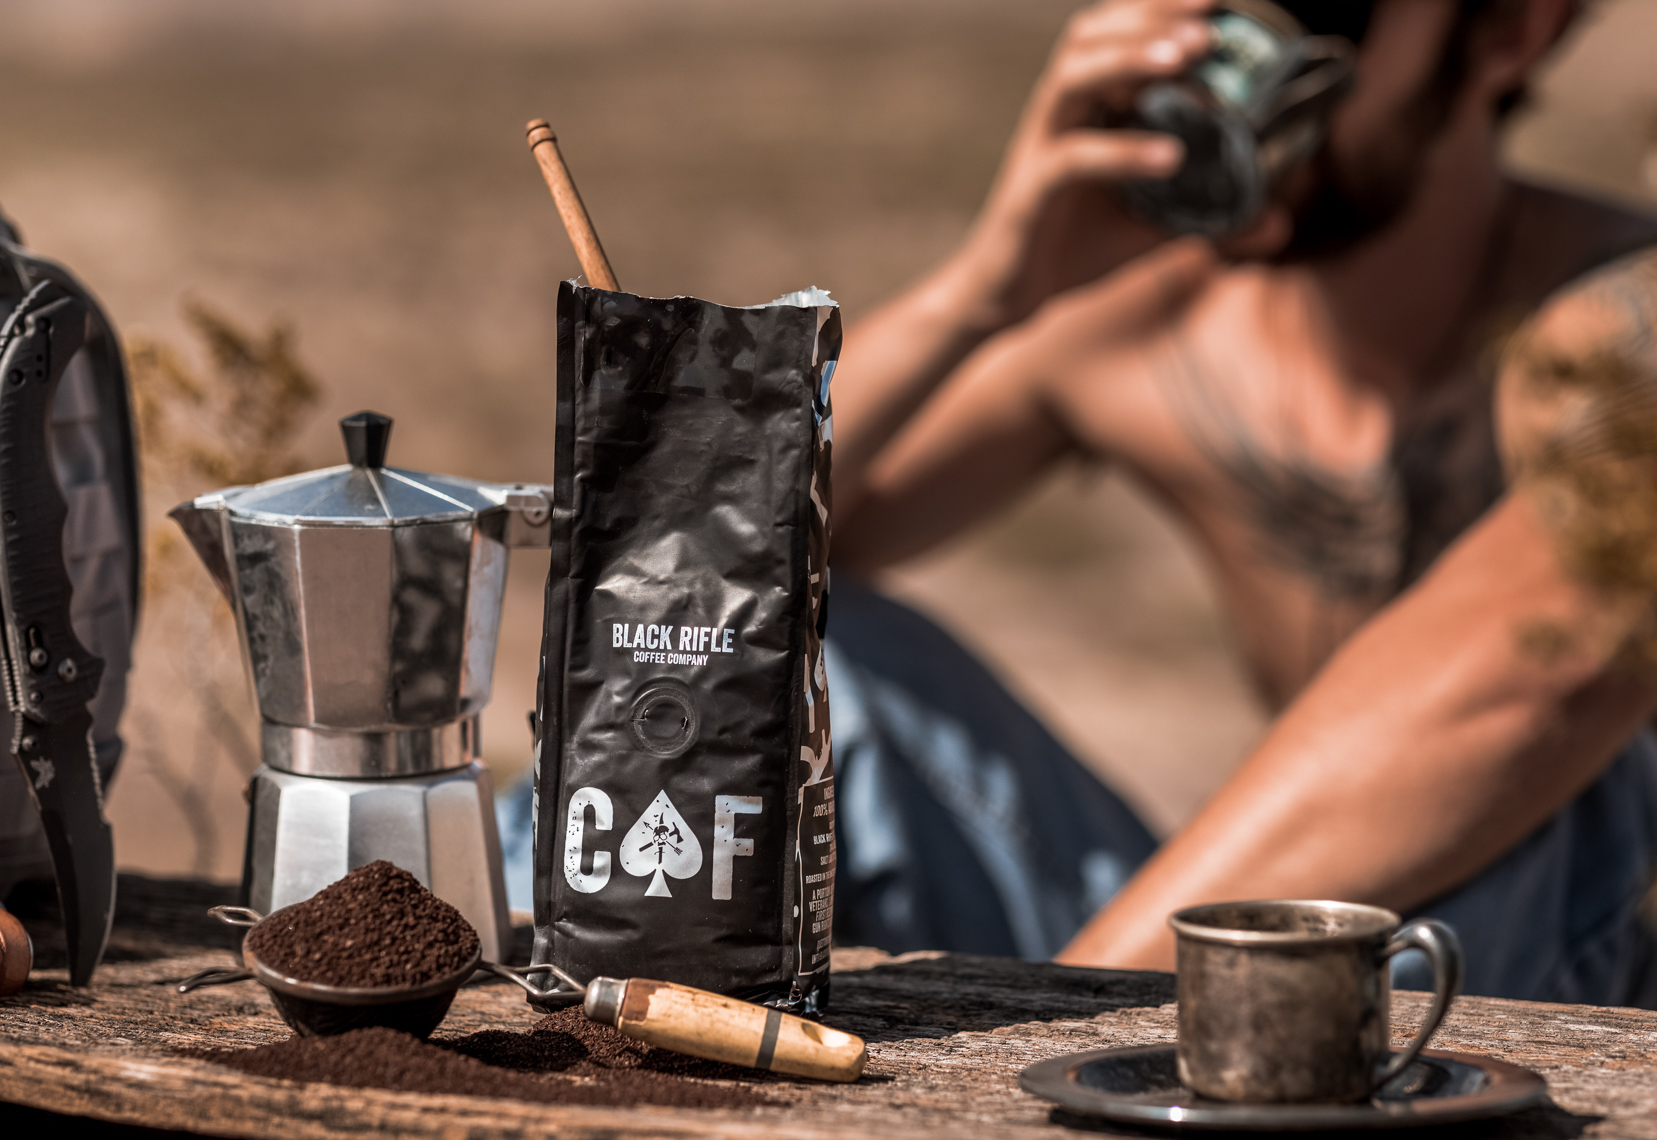 Product Photography for Black Rifle Coffee Company by Jason Risner at Big Bend